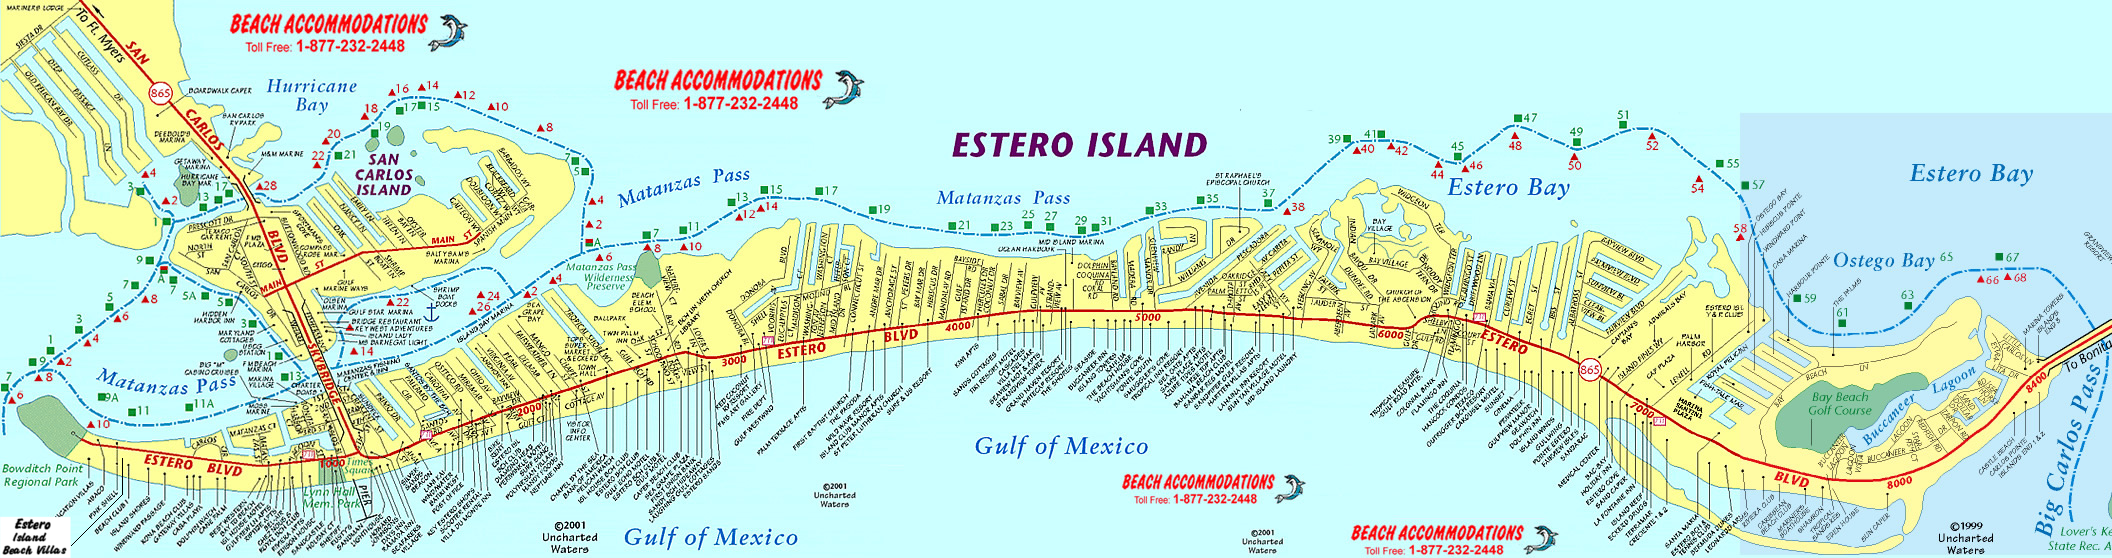 Fort Myers Beach Map With Images Fort Myers Beach Estero Island 